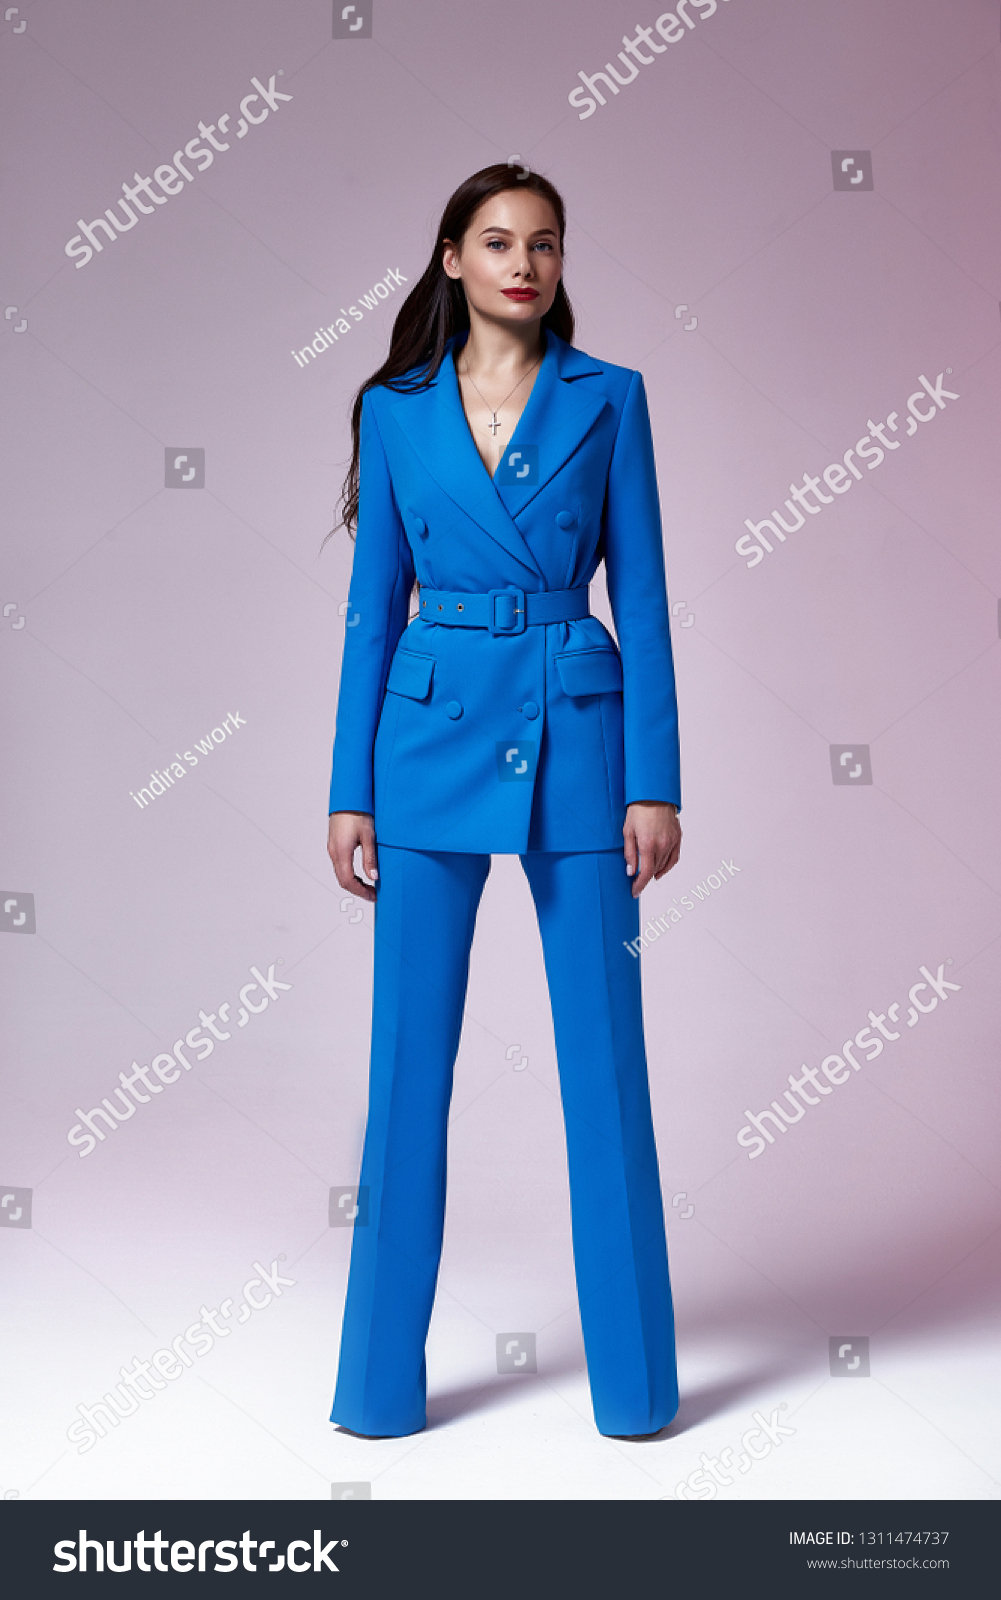 business woman outfit